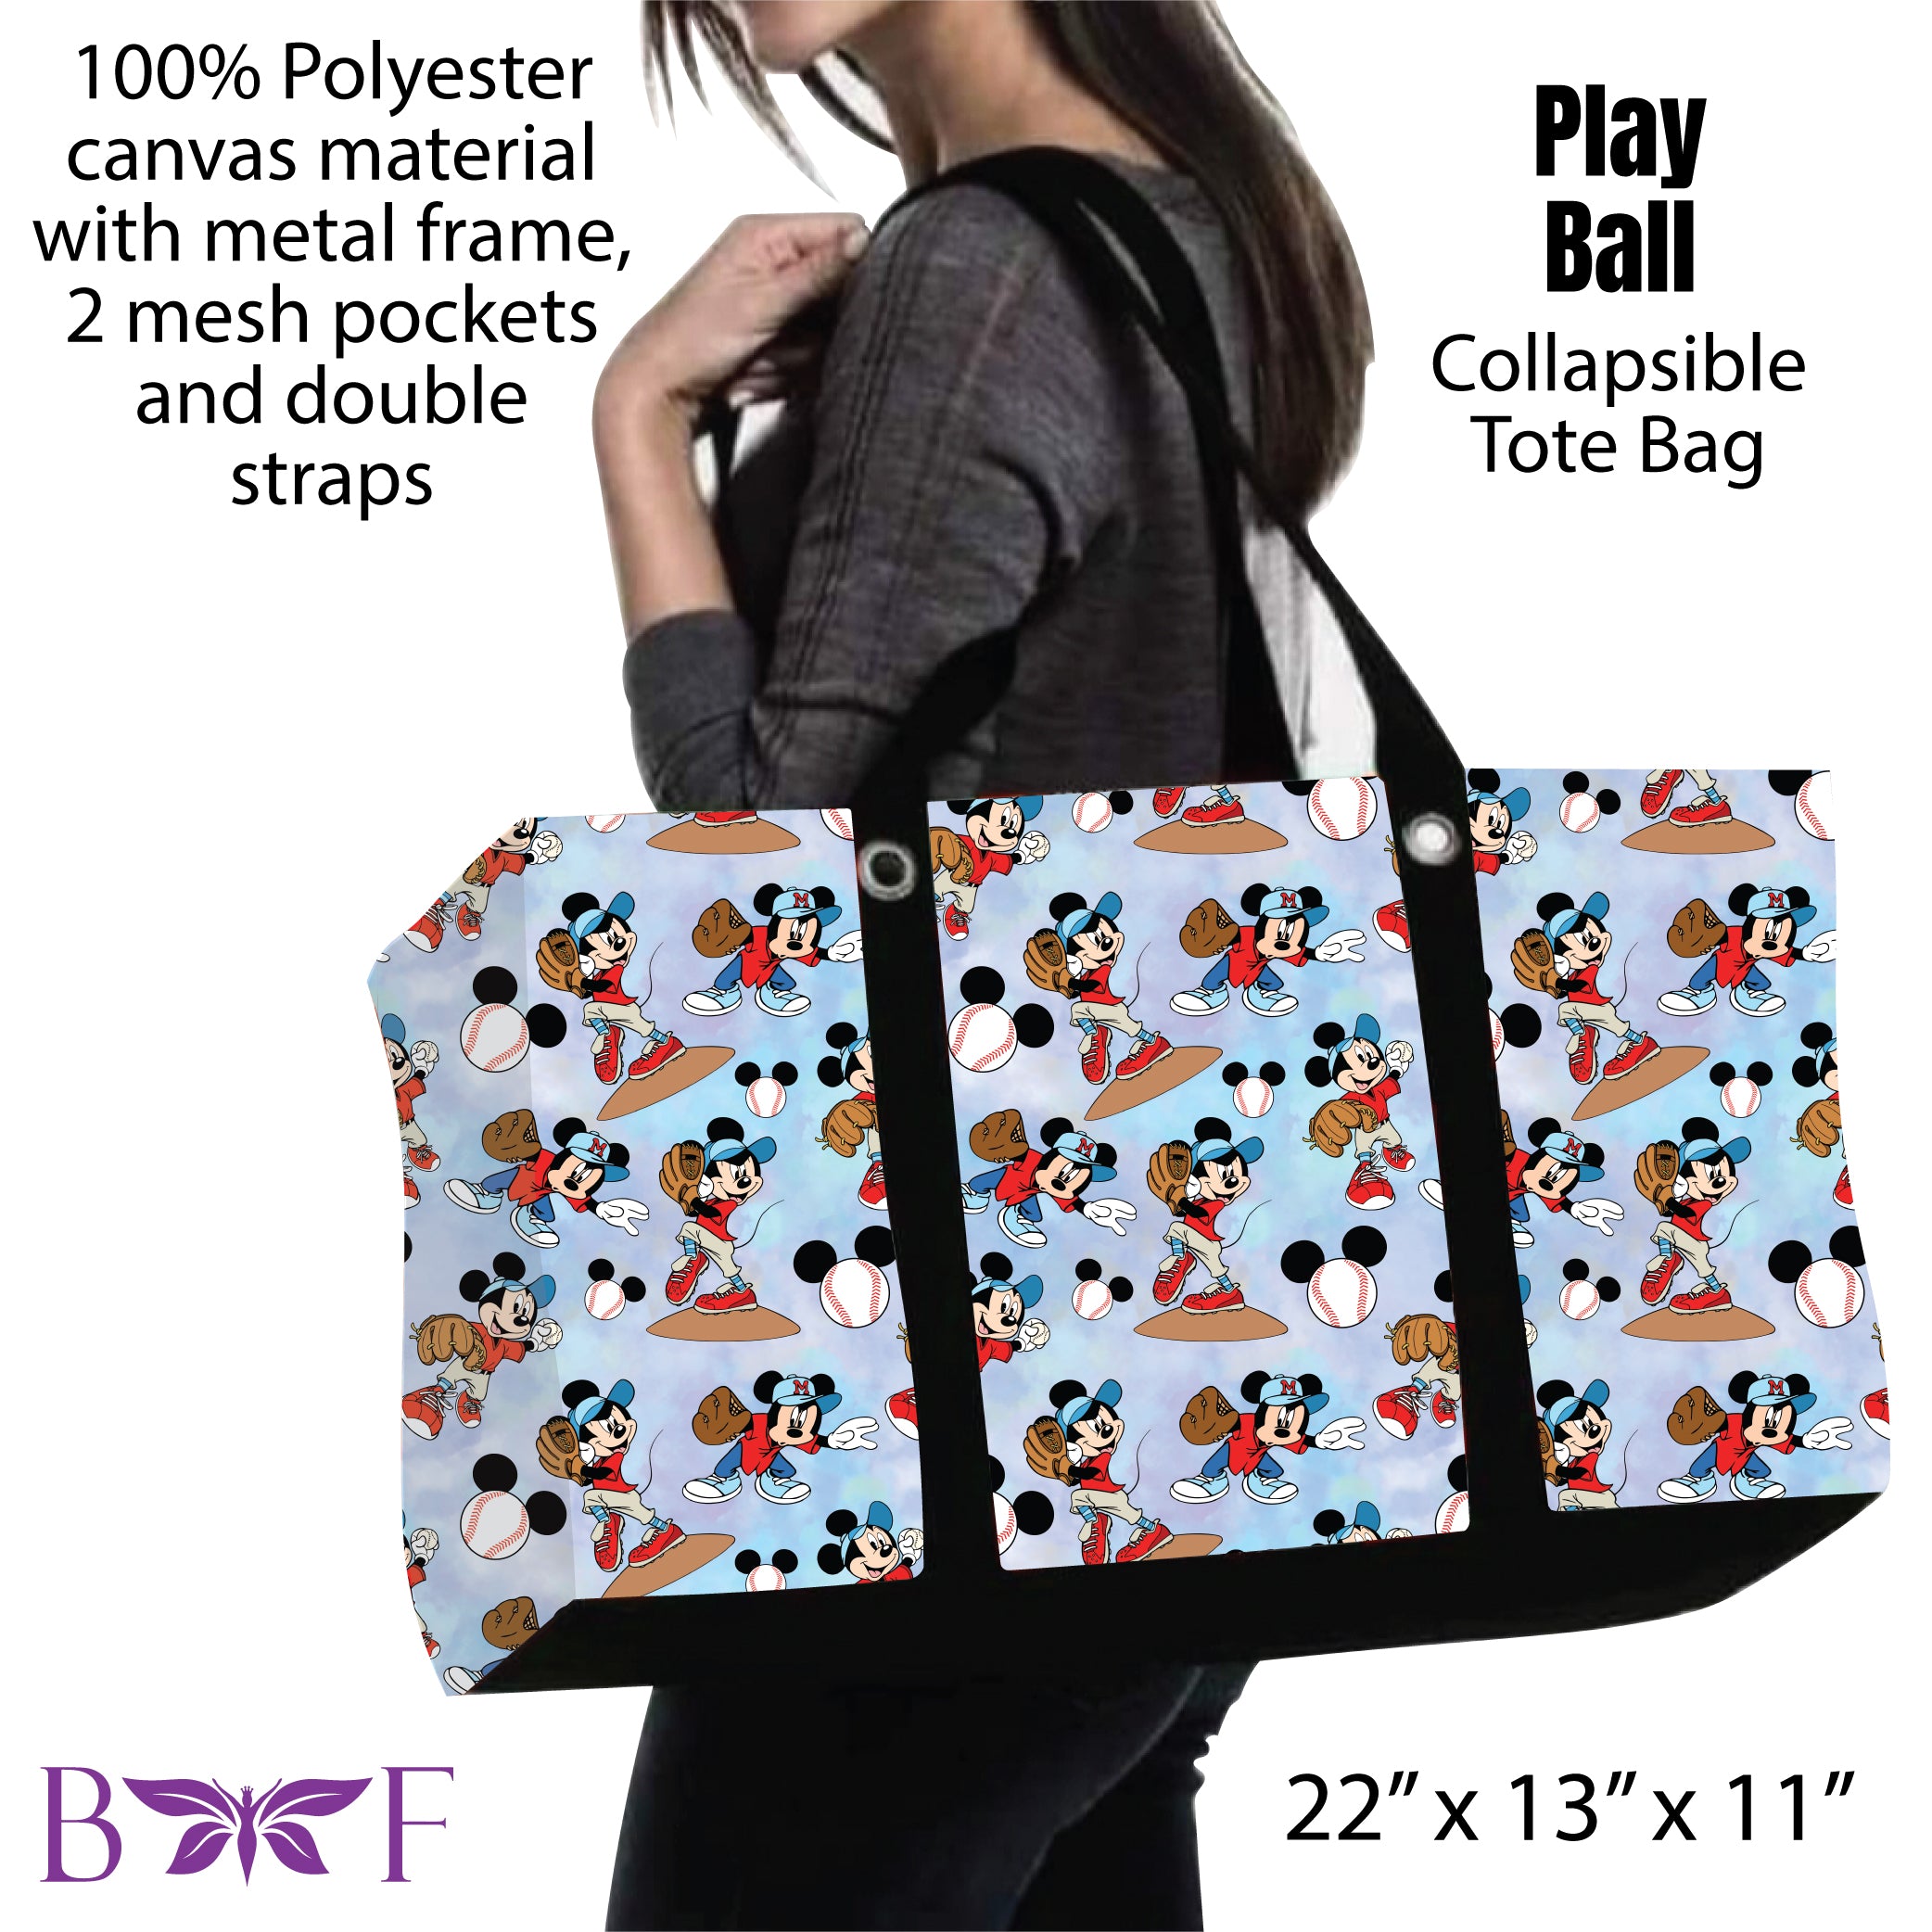 Play Ball tote and 2 inside mesh pockets